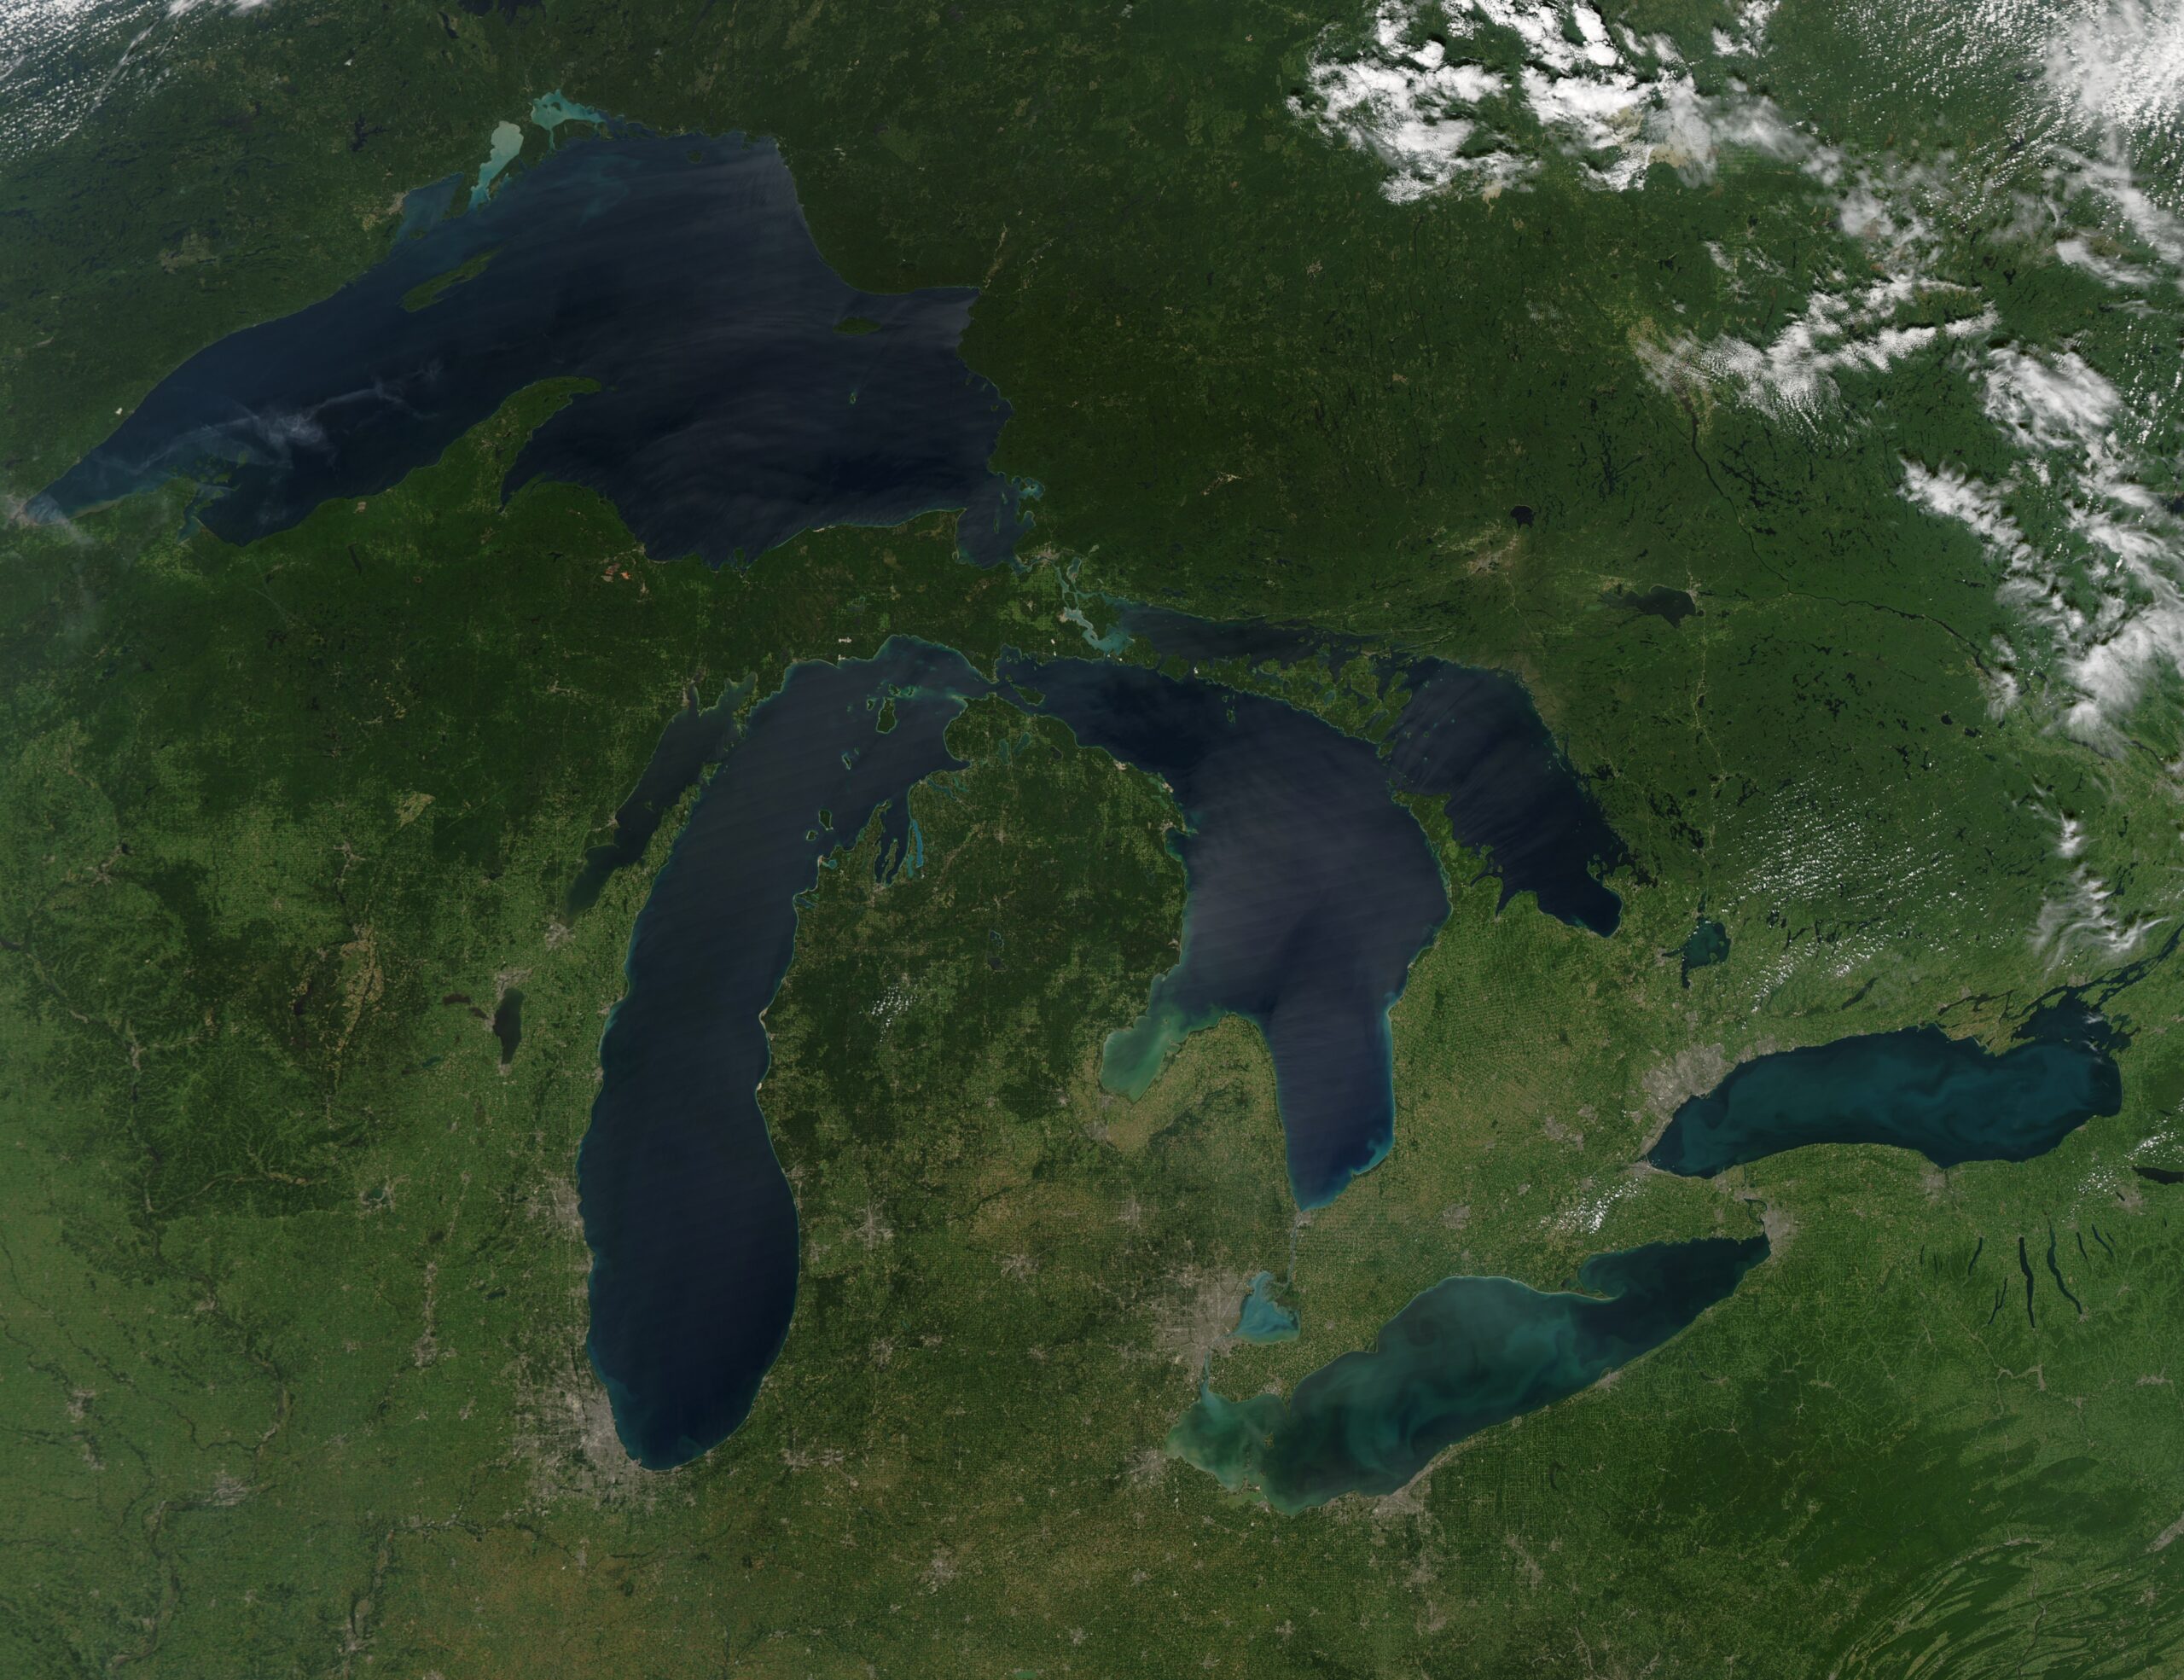 Poll finds people are willing to pay to protect the Great Lakes amid rising water quality concerns